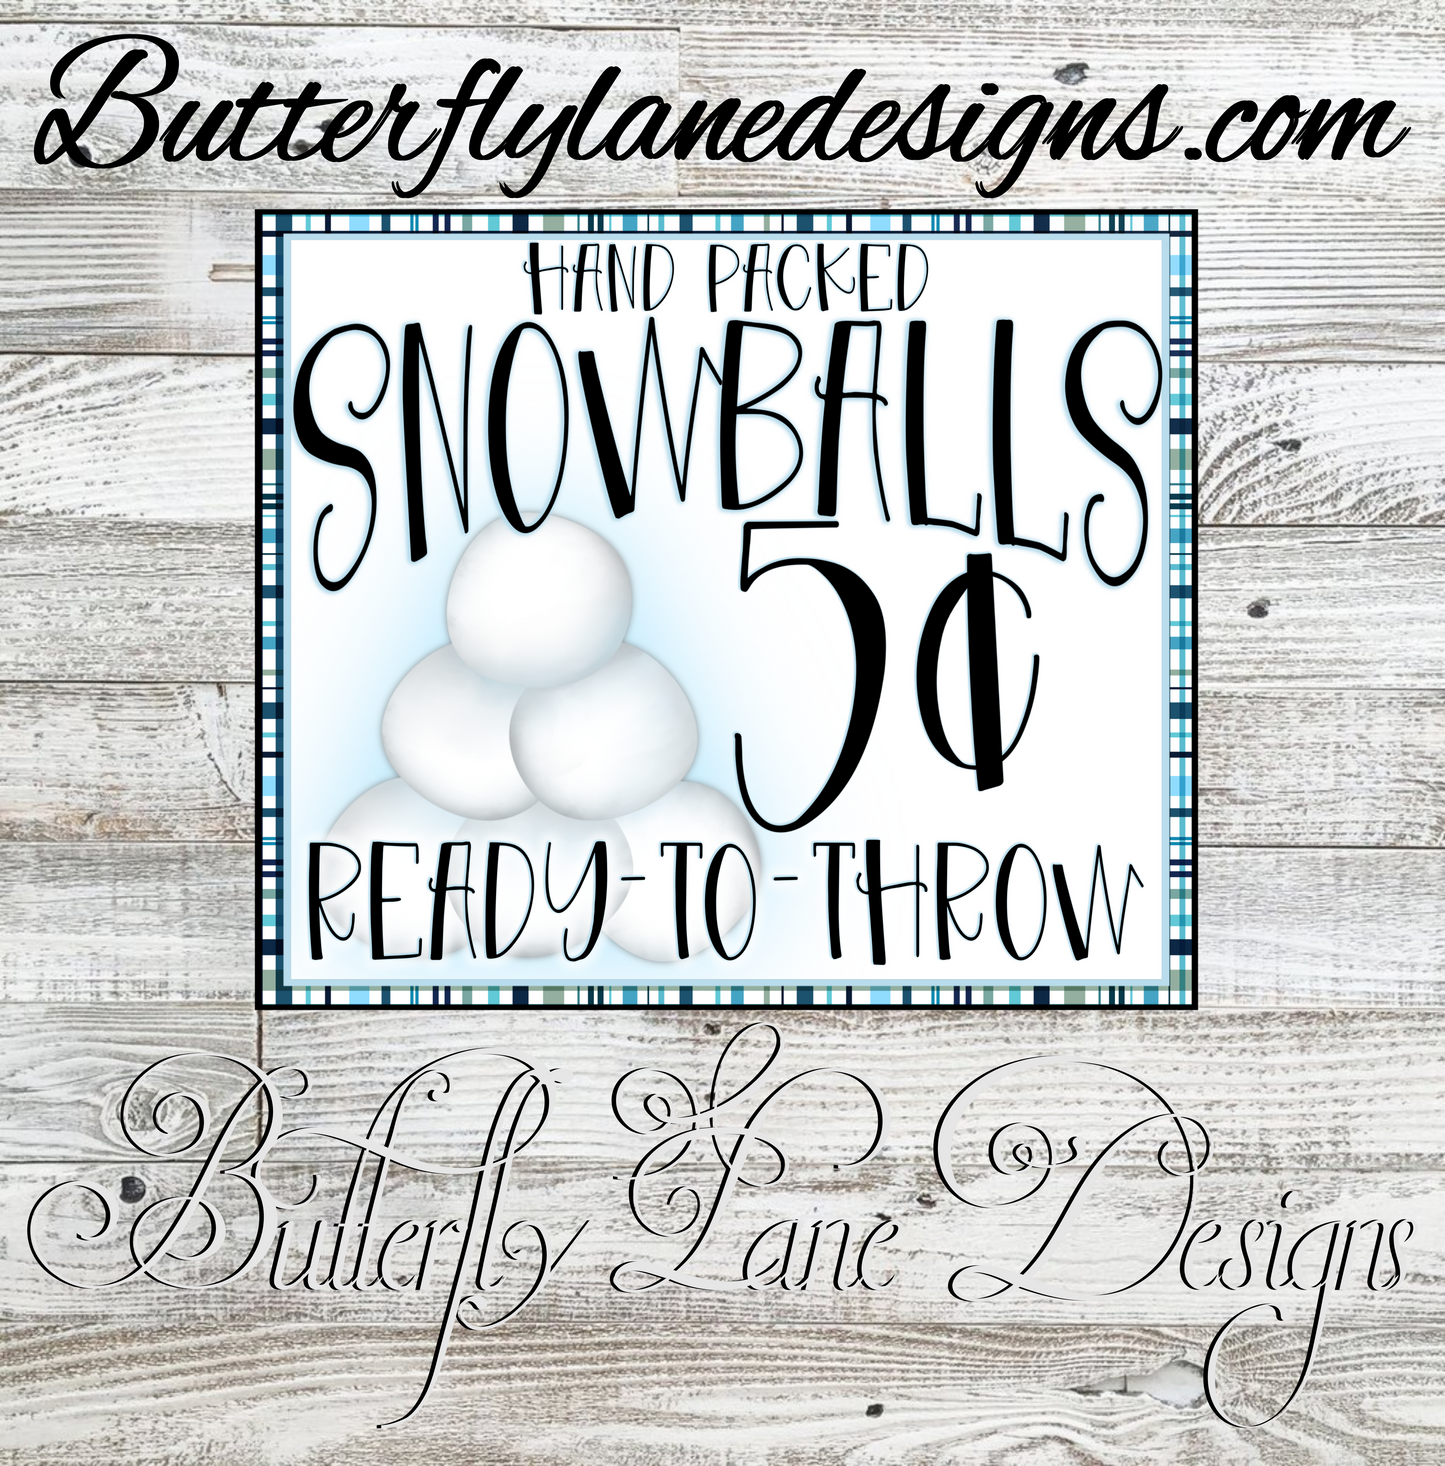 Ready to throw snowballs- :: Clear Decal :: VC Decal